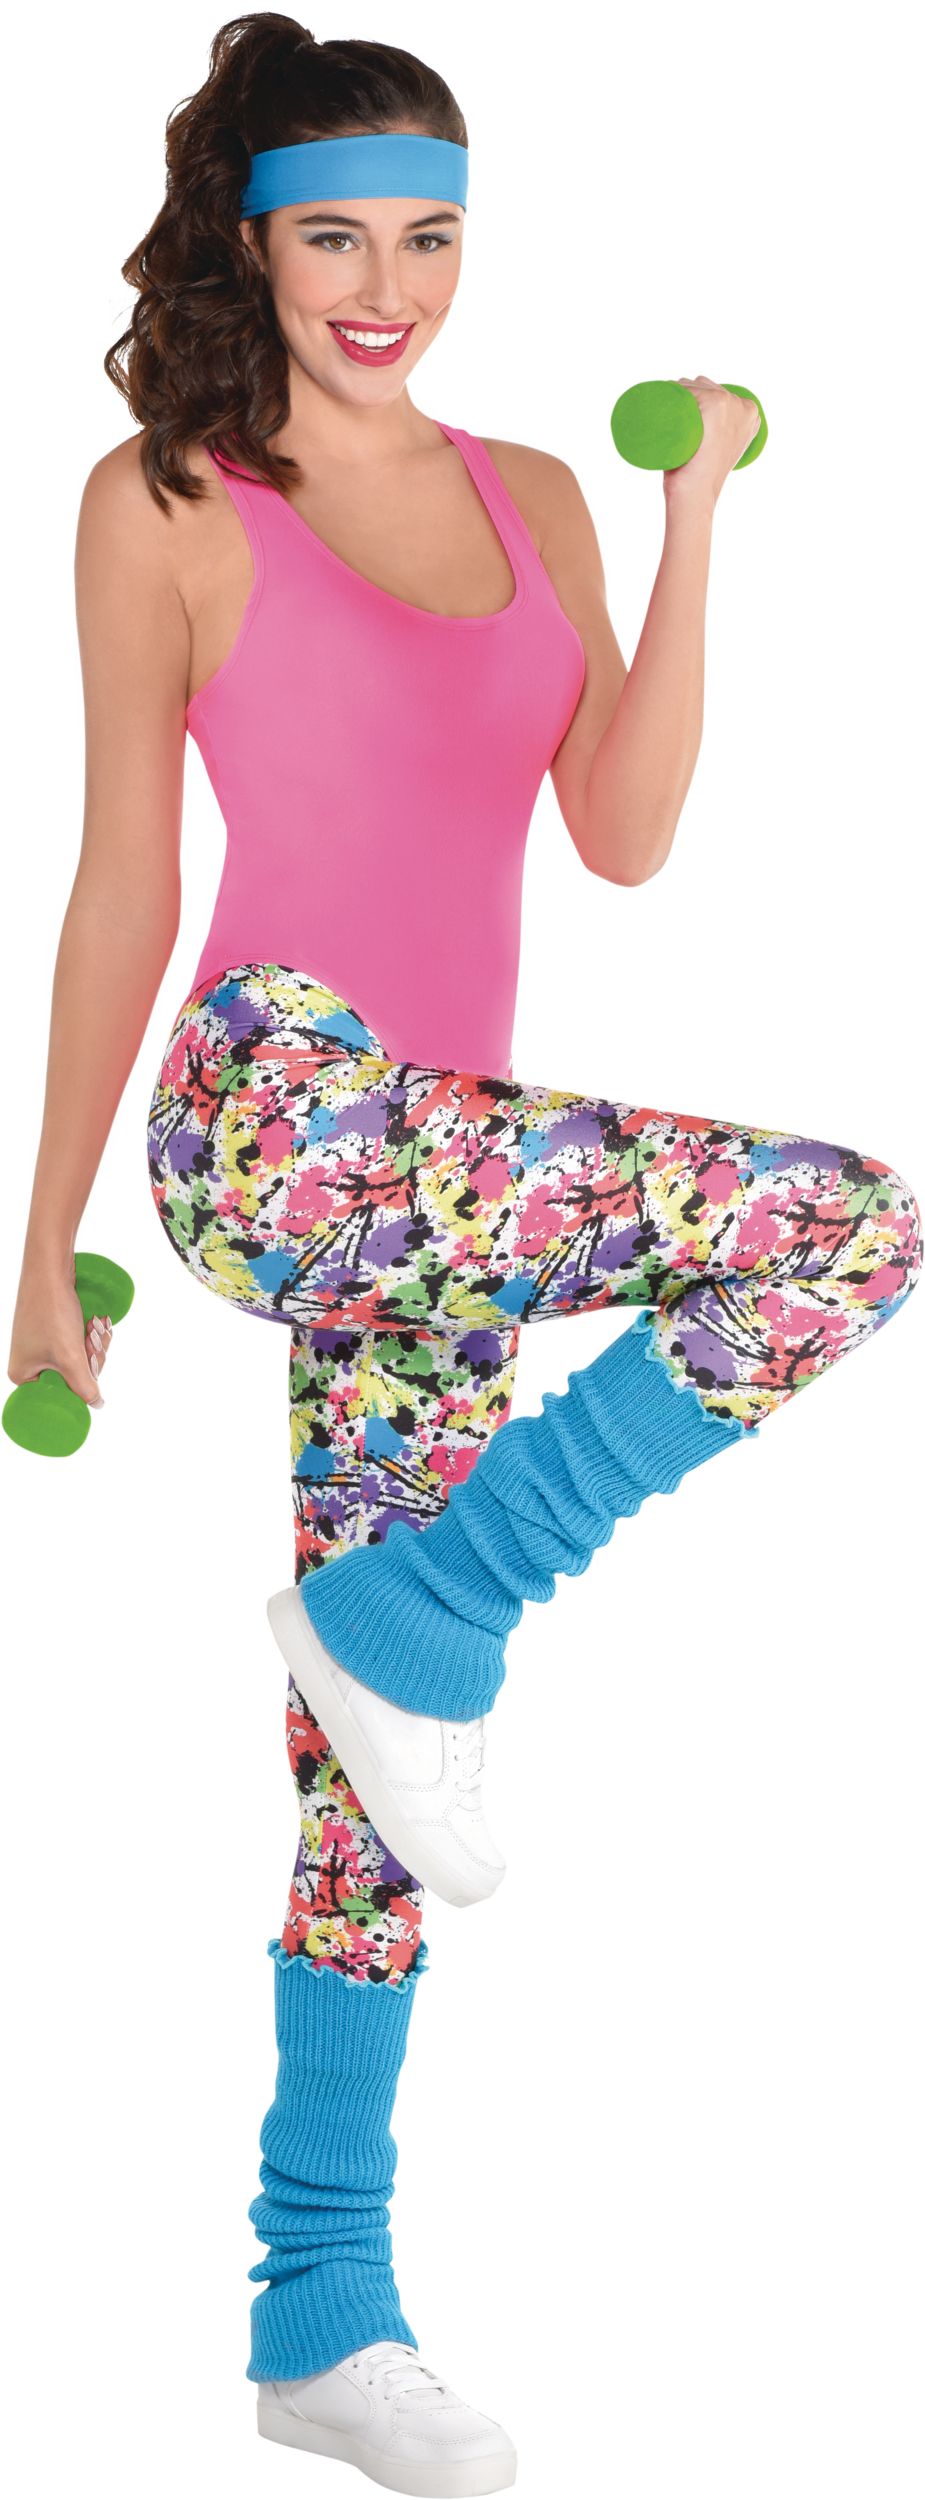 Adult 1980s Exercise Outfit with Body Suit, Leg Warmers & Head